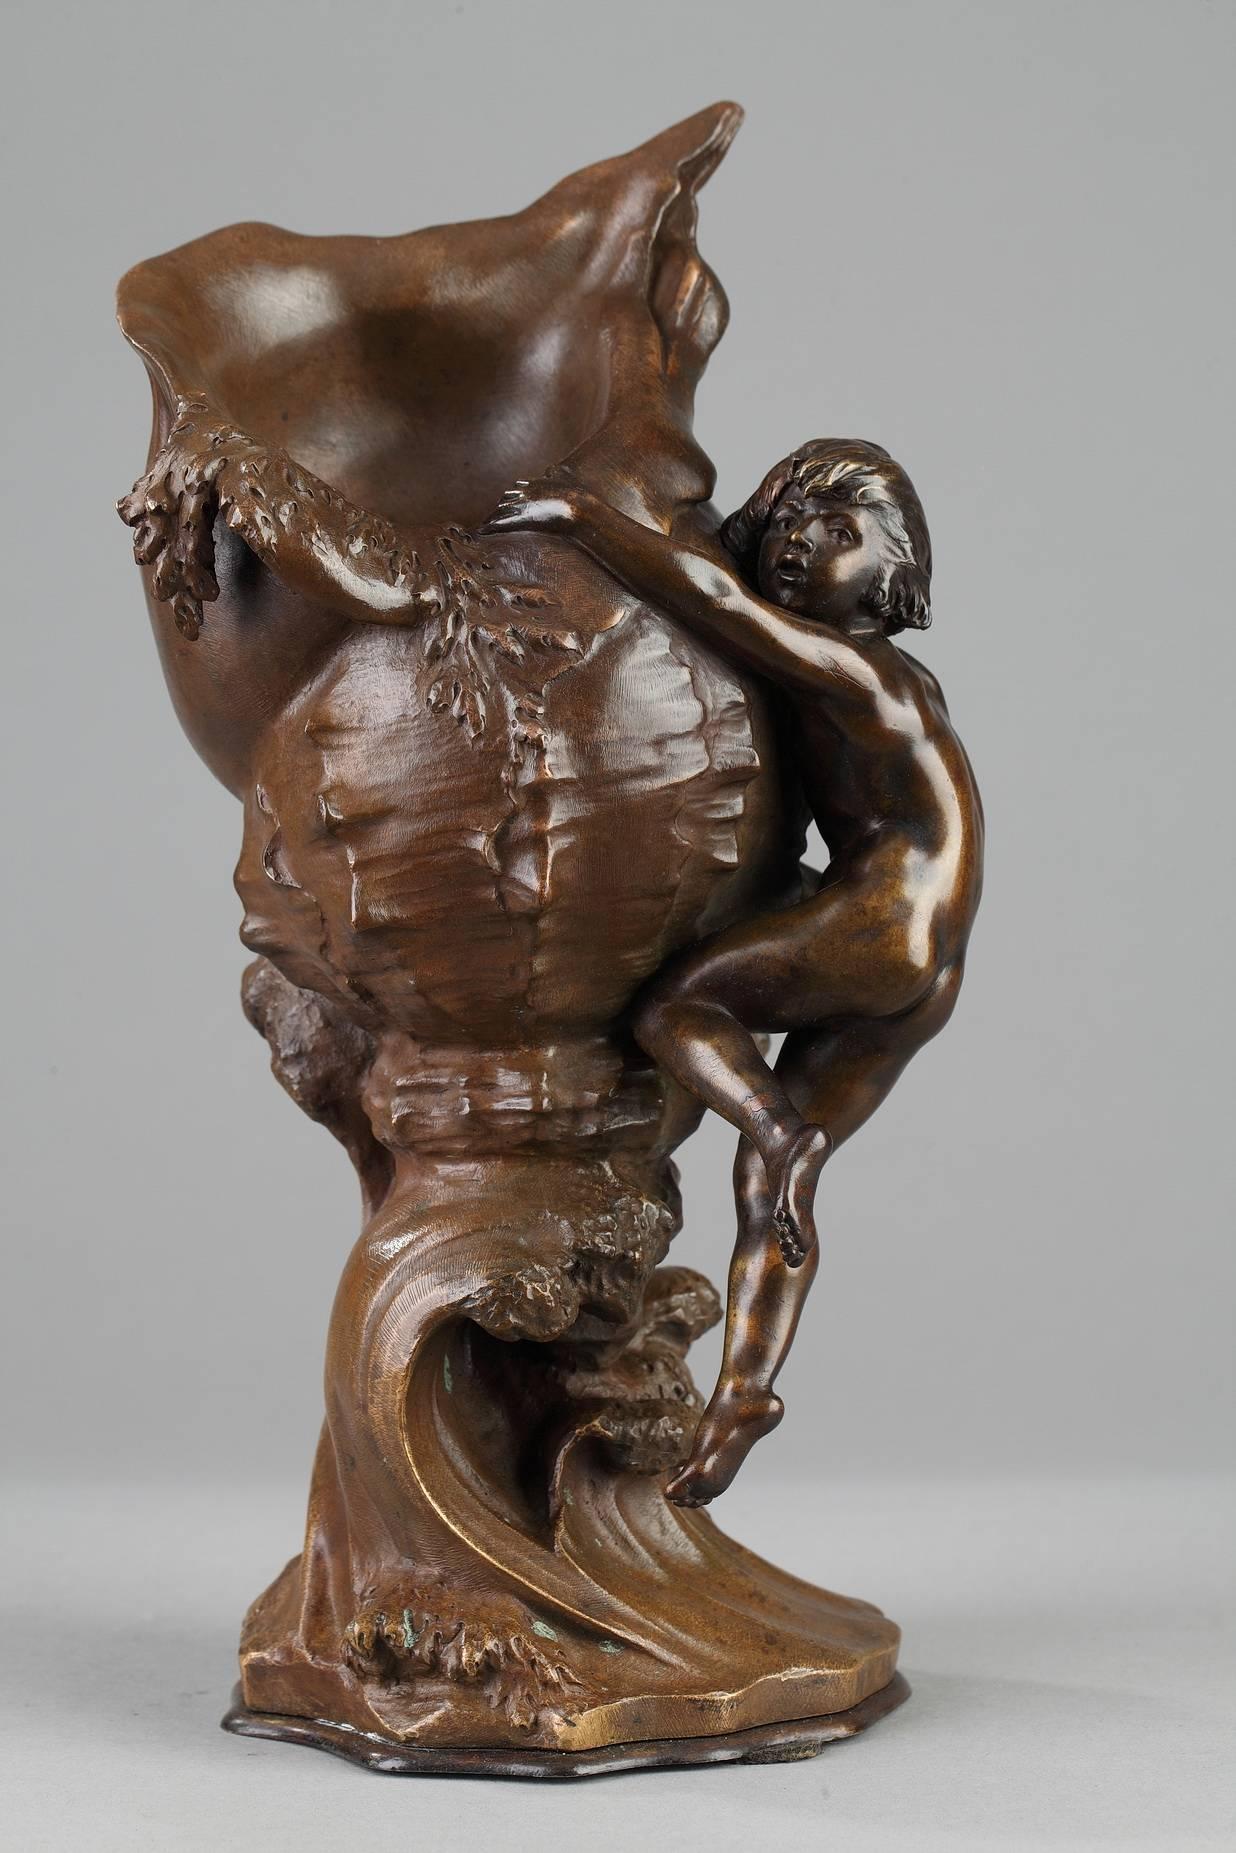 Late 19th century pair of bronze vases with brown patina depicting a young boy and girl climbing up shells, which are supported by waves. Both pieces are signed on the base: 